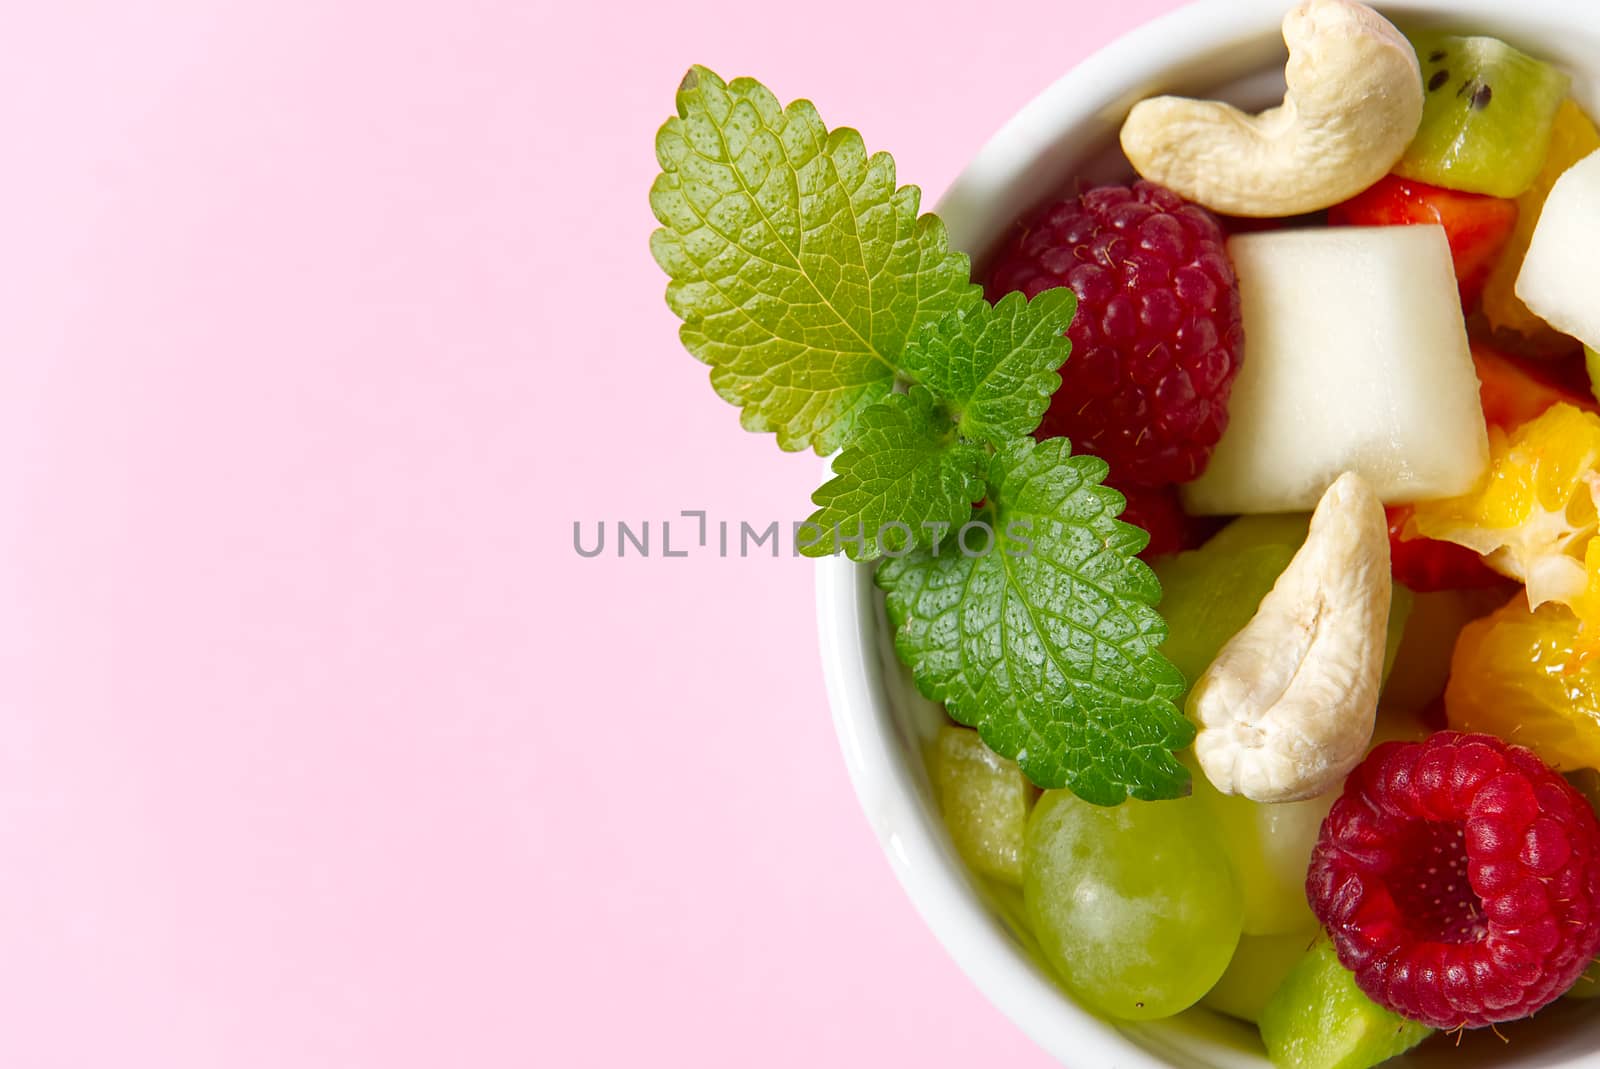 Three bowls with fruit salad. Fresh fruit salad on white bowl. Mixed fruit in white bowl healthy food style. Useful fruit salad of fresh fruits and berries on pink background.